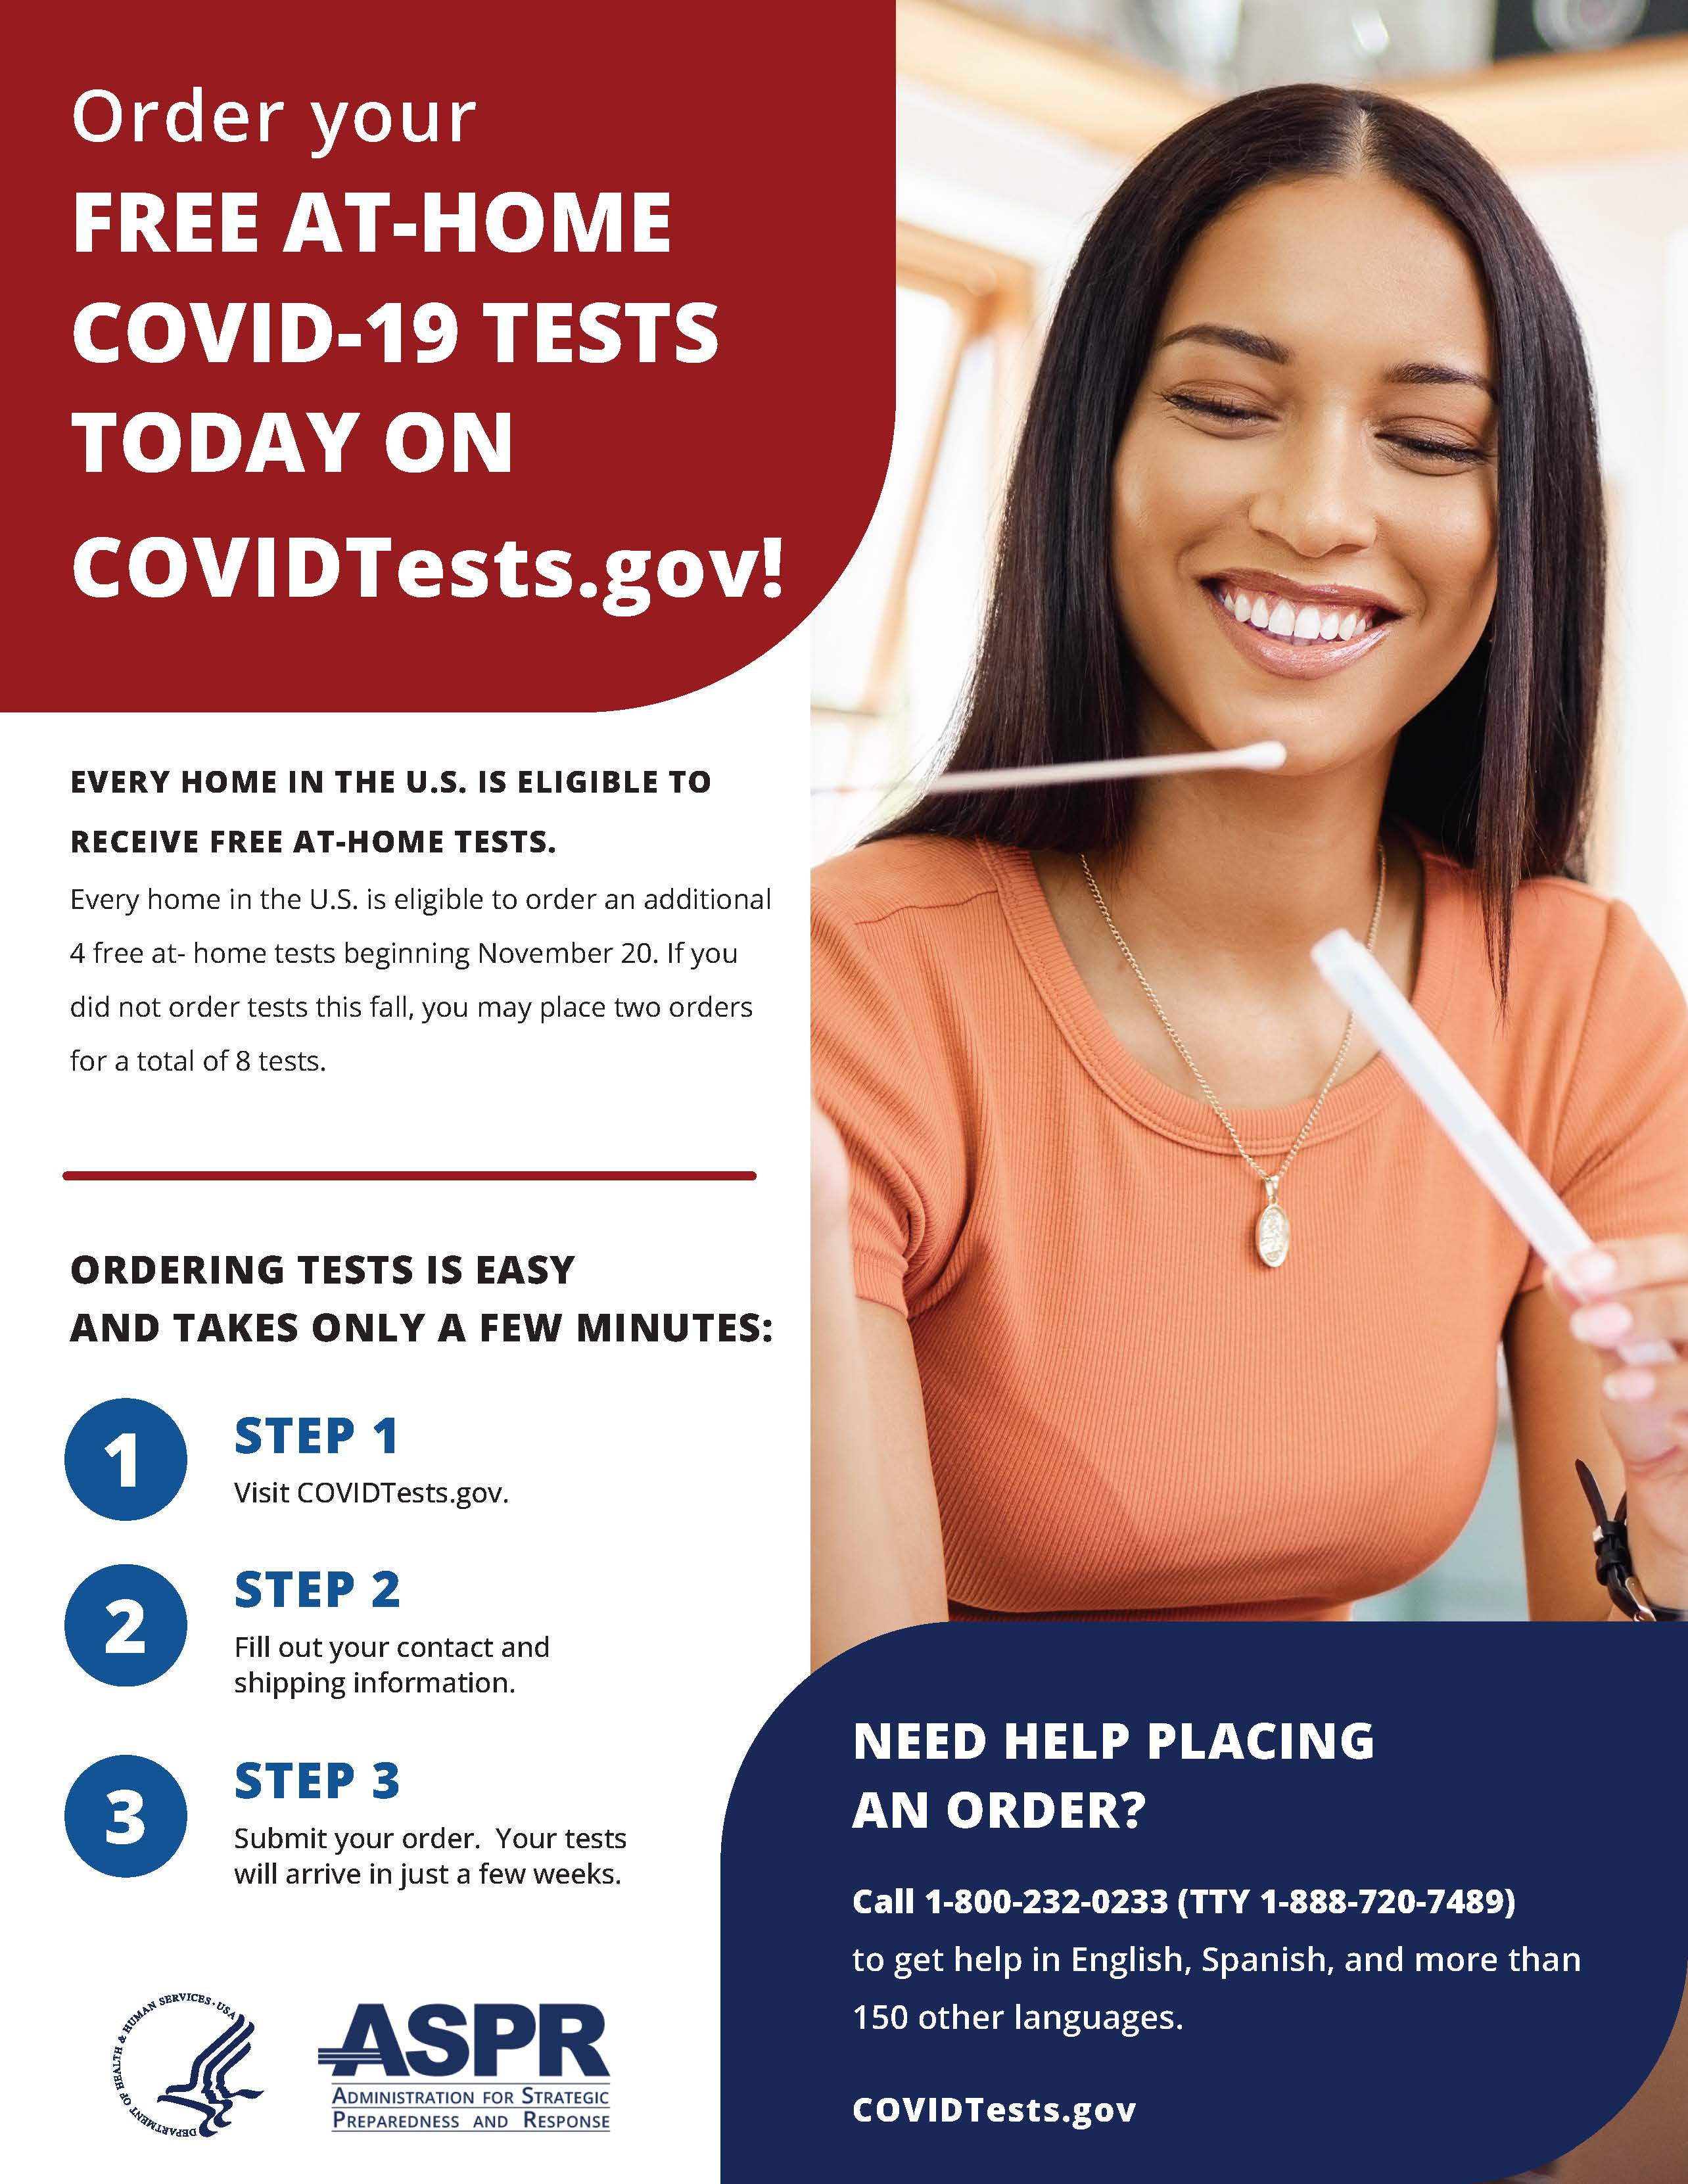 The image is an informational flyer promoting the availability of free at-home COVID-19 tests. The flyer details how to order the tests and includes the following points:  It announces "Order your FREE AT-HOME COVID-19 TESTS TODAY ON COVIDTests.gov!" Every home in the U.S. is eligible to receive free at-home tests. Additional free tests are available starting November 20, and if you haven't ordered tests in the fall, you may place two orders for a total of eight tests. The process of ordering tests is described as easy and quick, involving three steps: visiting COVIDTests.gov, filling out contact and shipping information, and submitting the order. The tests will arrive in a few weeks. If assistance is needed in placing an order, a helpline is provided with the number 1-800-232-0233 (TTY 1-888-720-7489), offering help in English, Spanish, and more than 150 other languages. The flyer includes the logo of ASPR (Administration for Strategic Preparedness and Response) and a picture of a smiling woman holding a COVID-19 test swab.